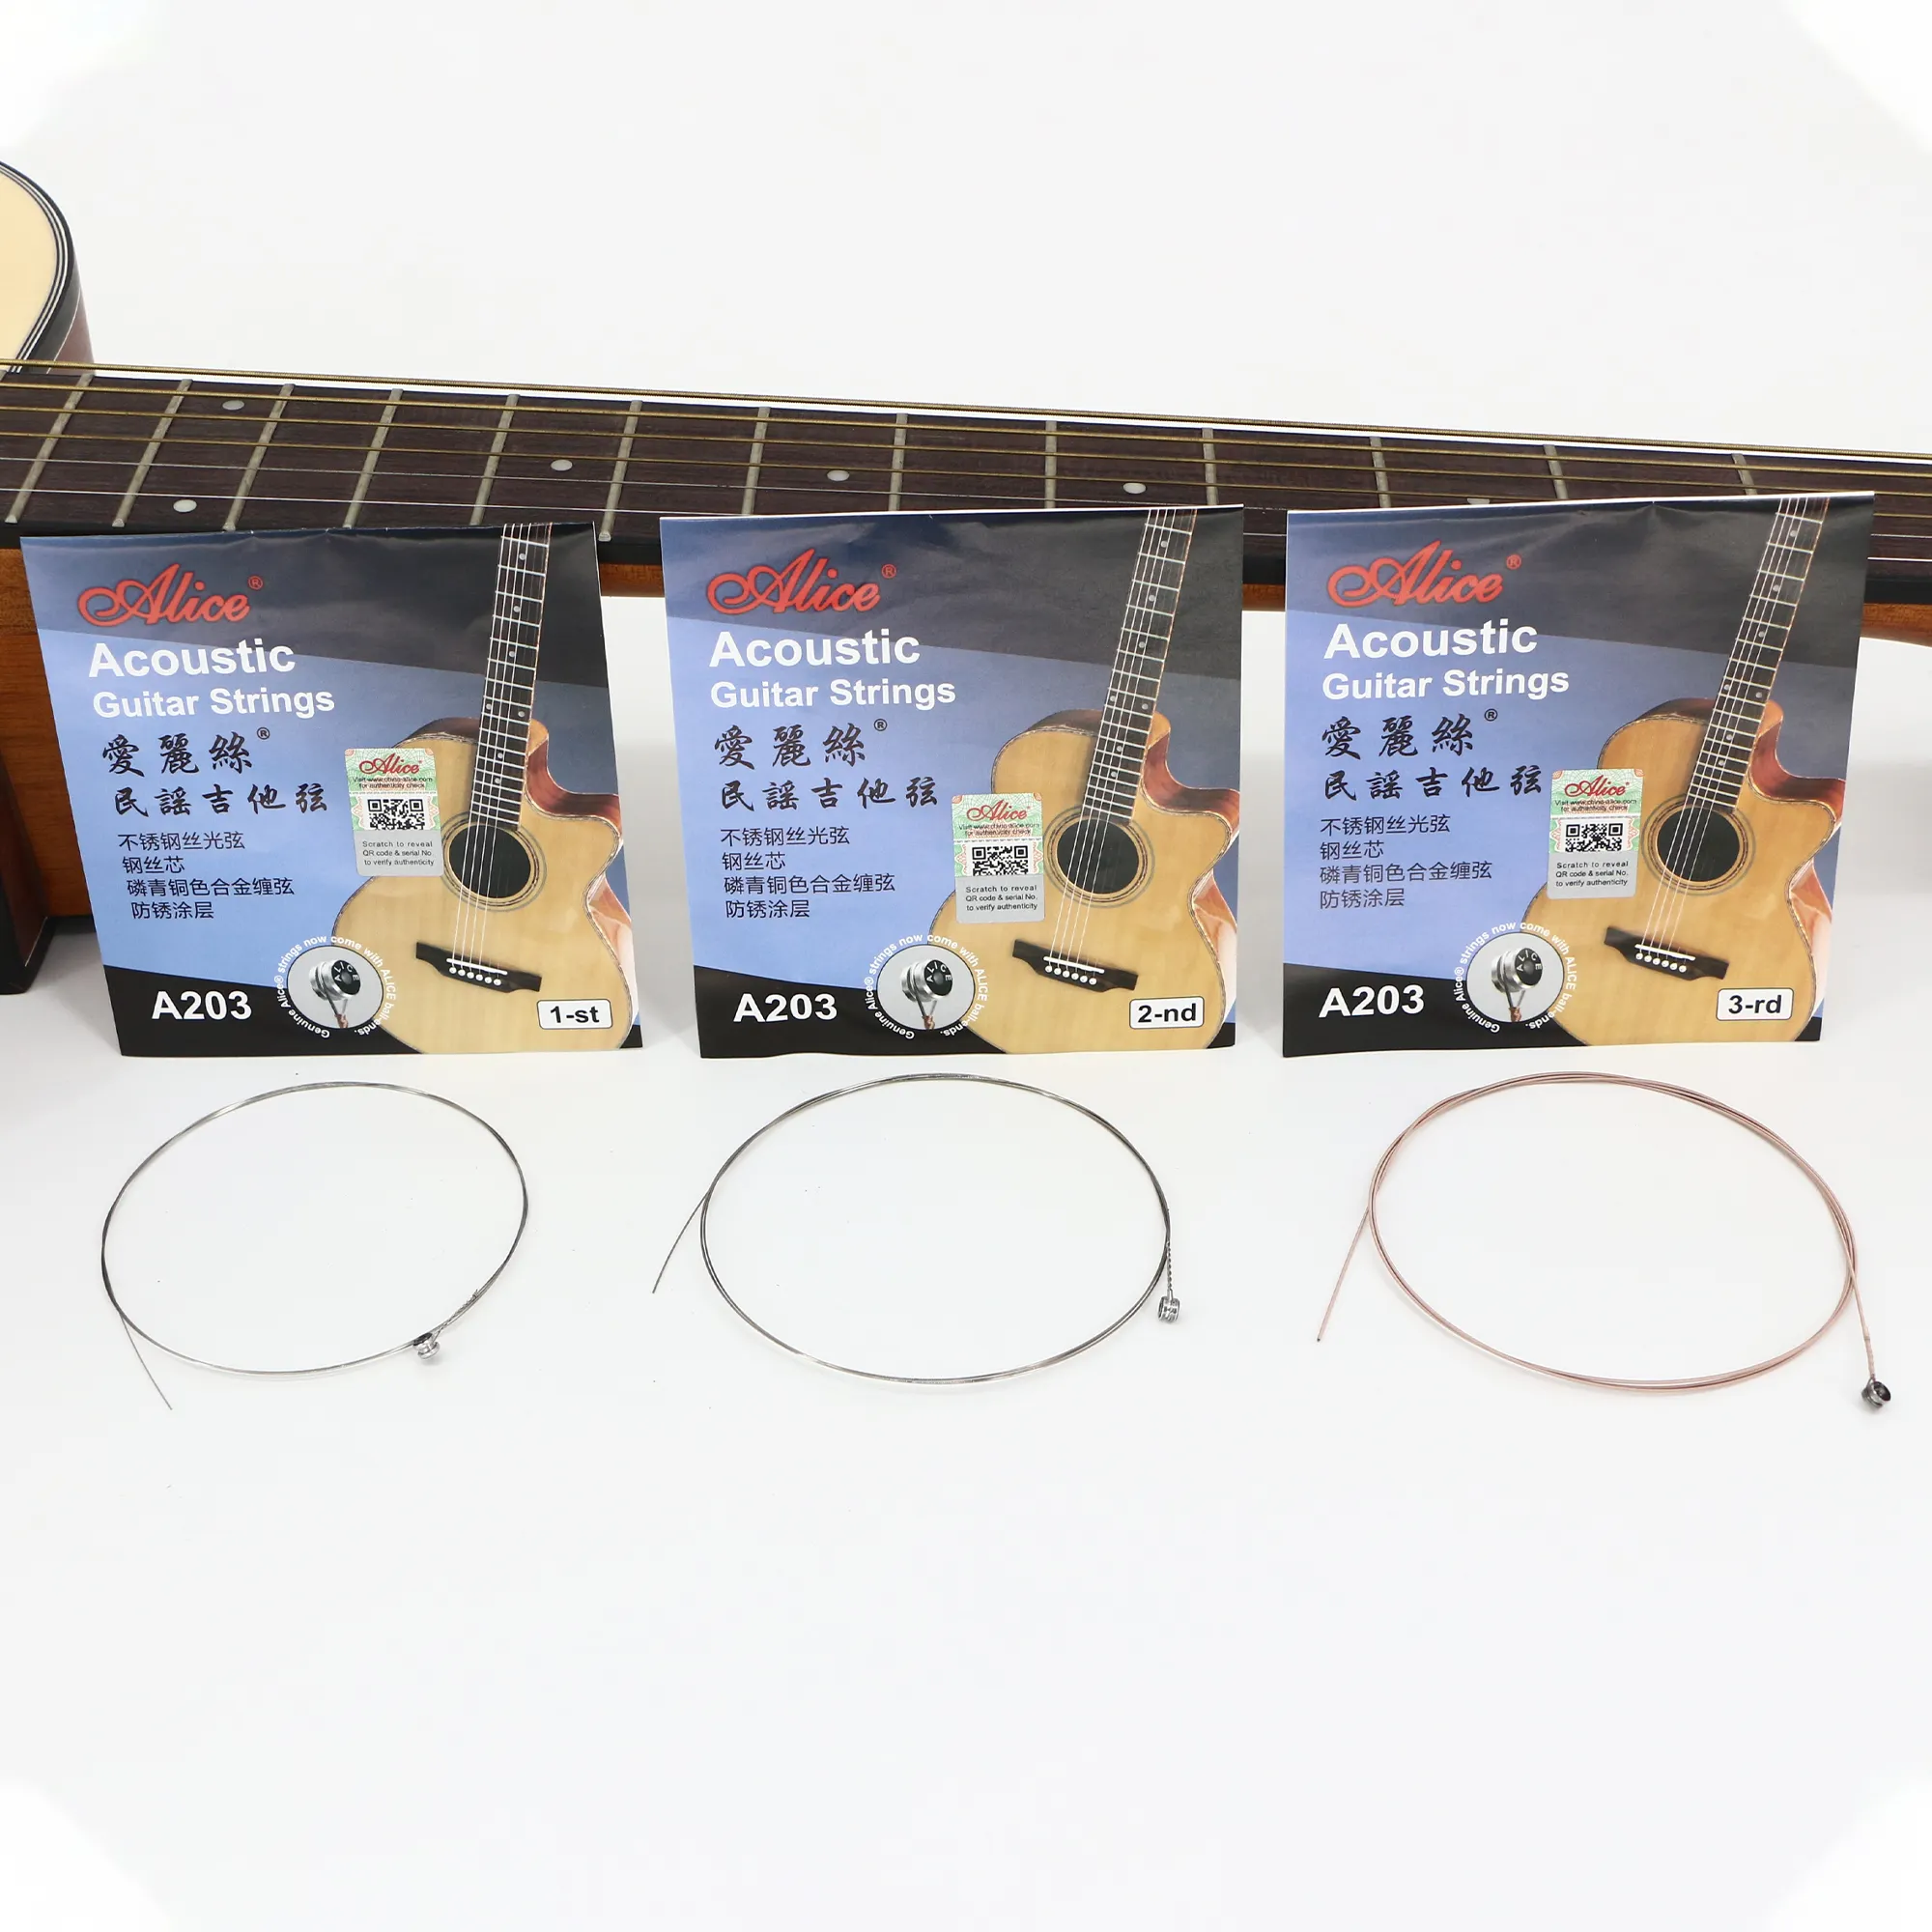 Alice acoustic guitar strings A203 guitar strings for acoustic